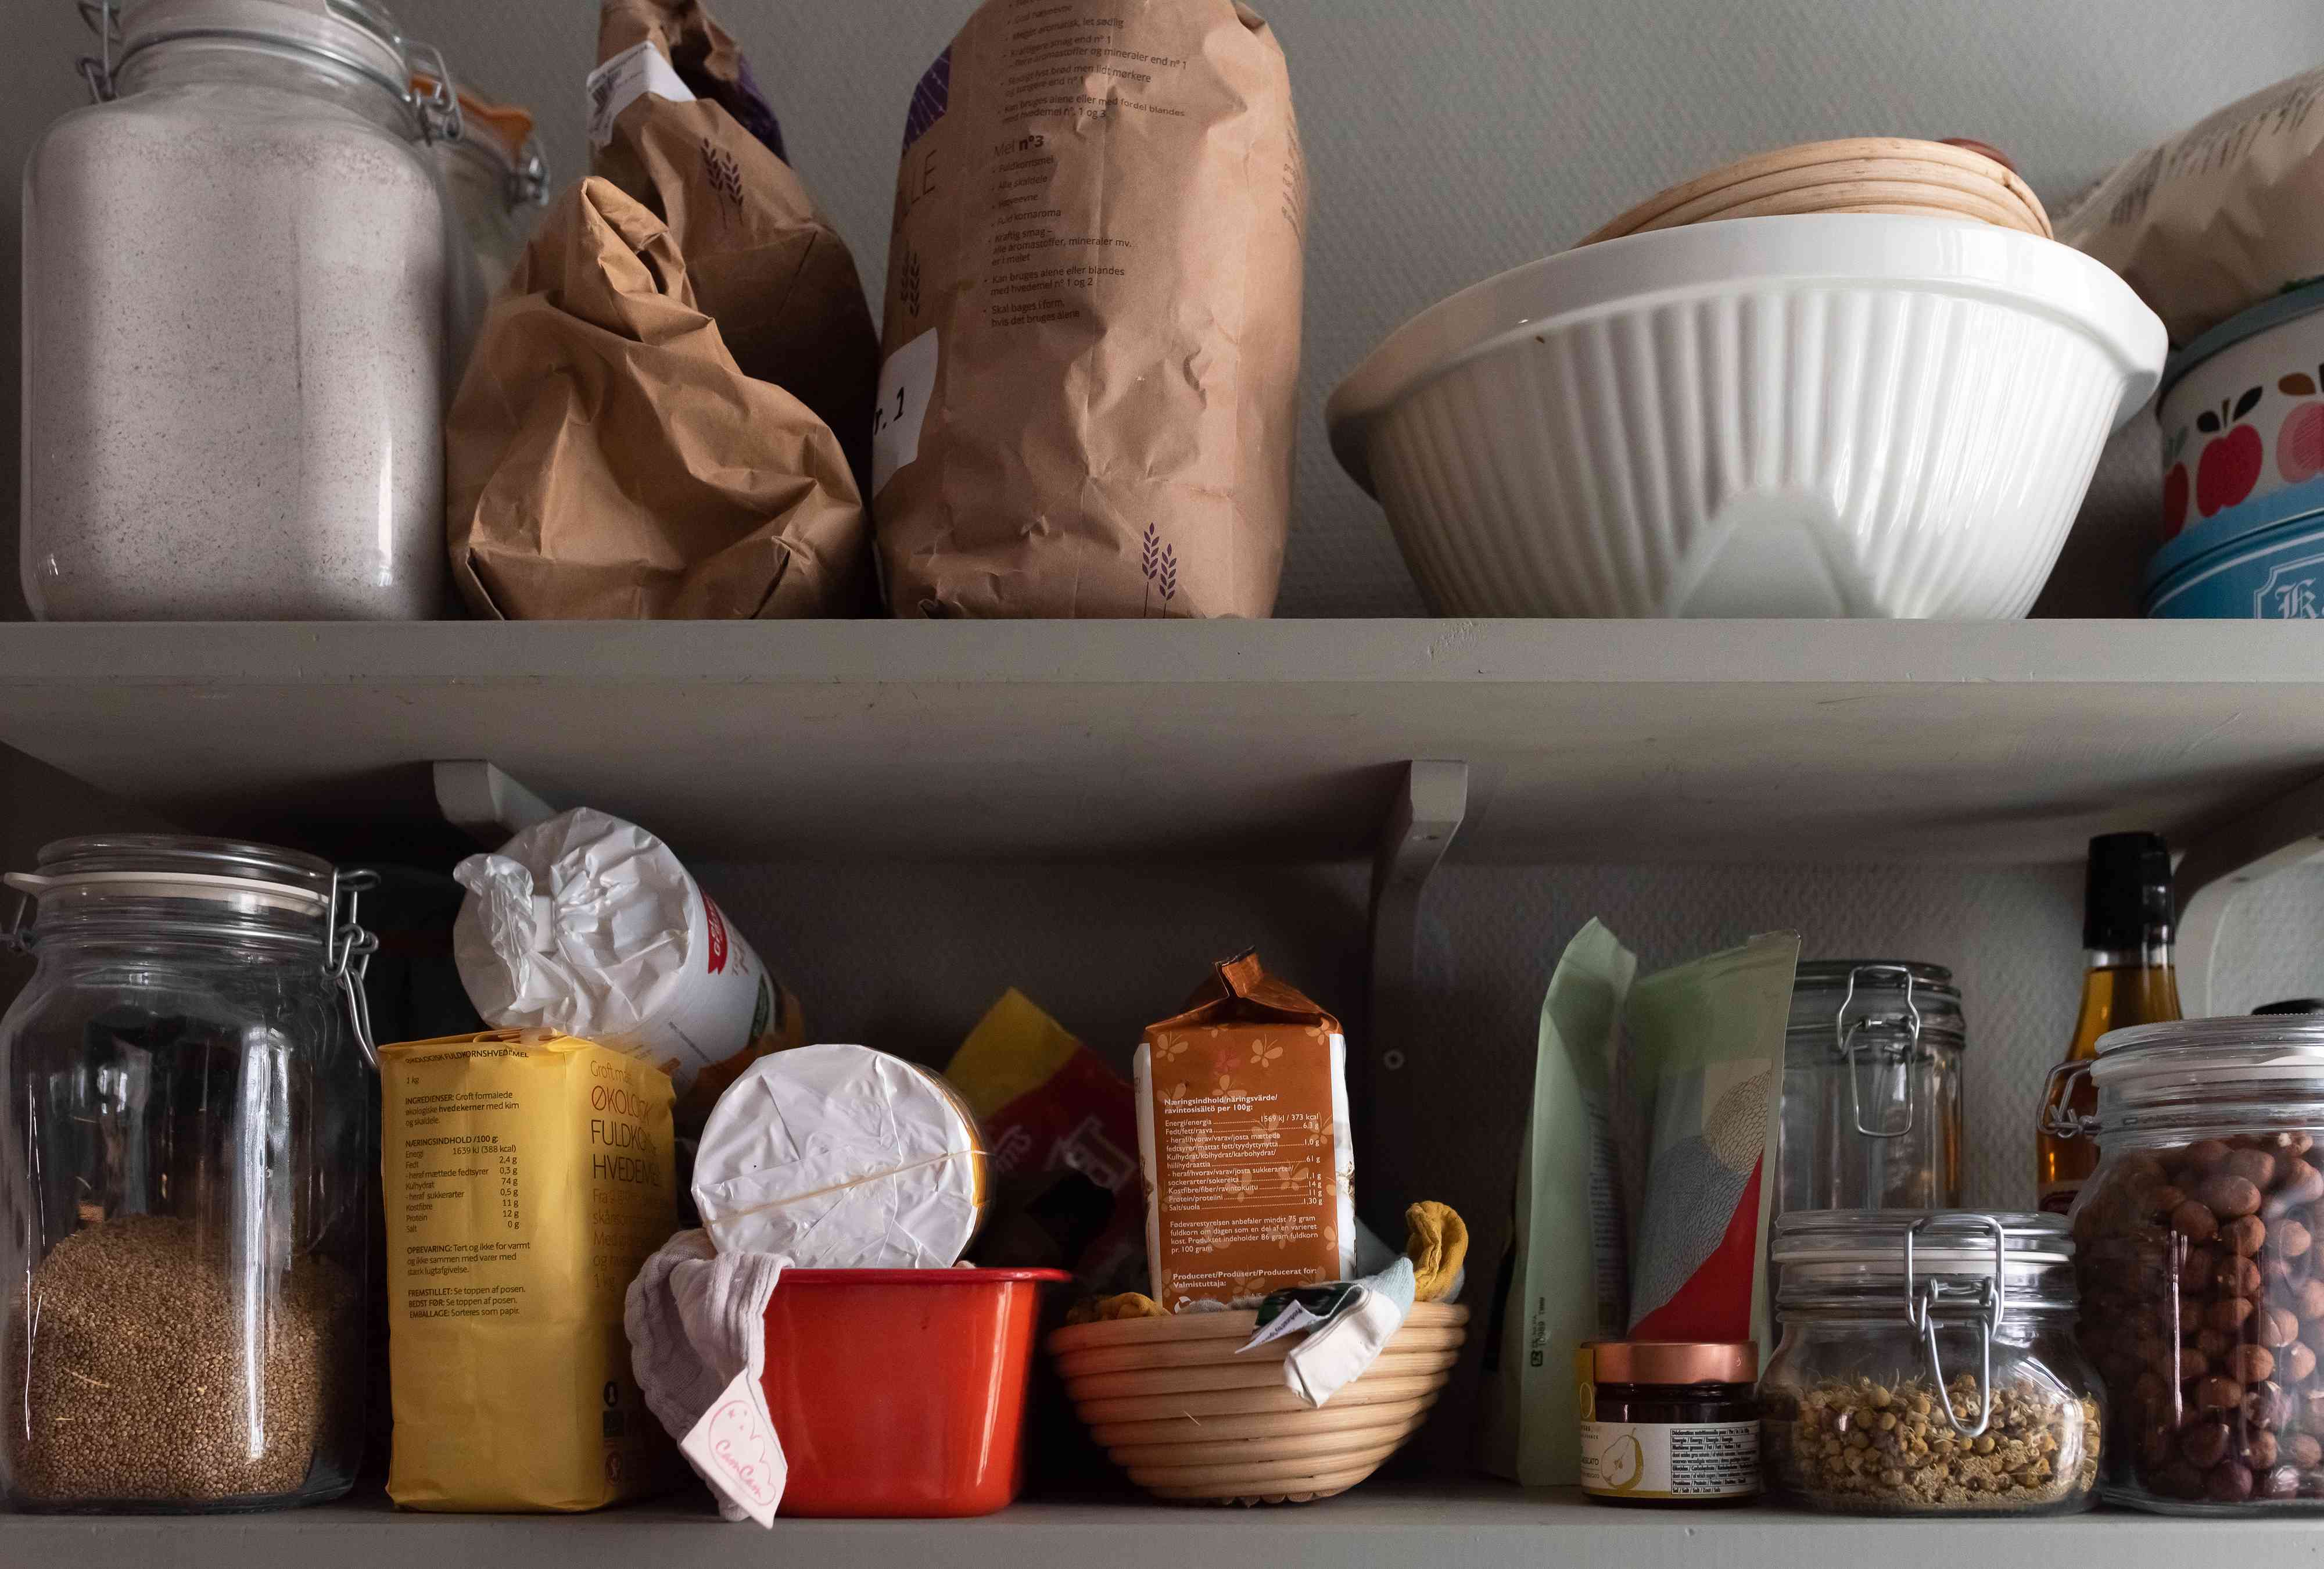 how your pantry looks says a lot about who you are